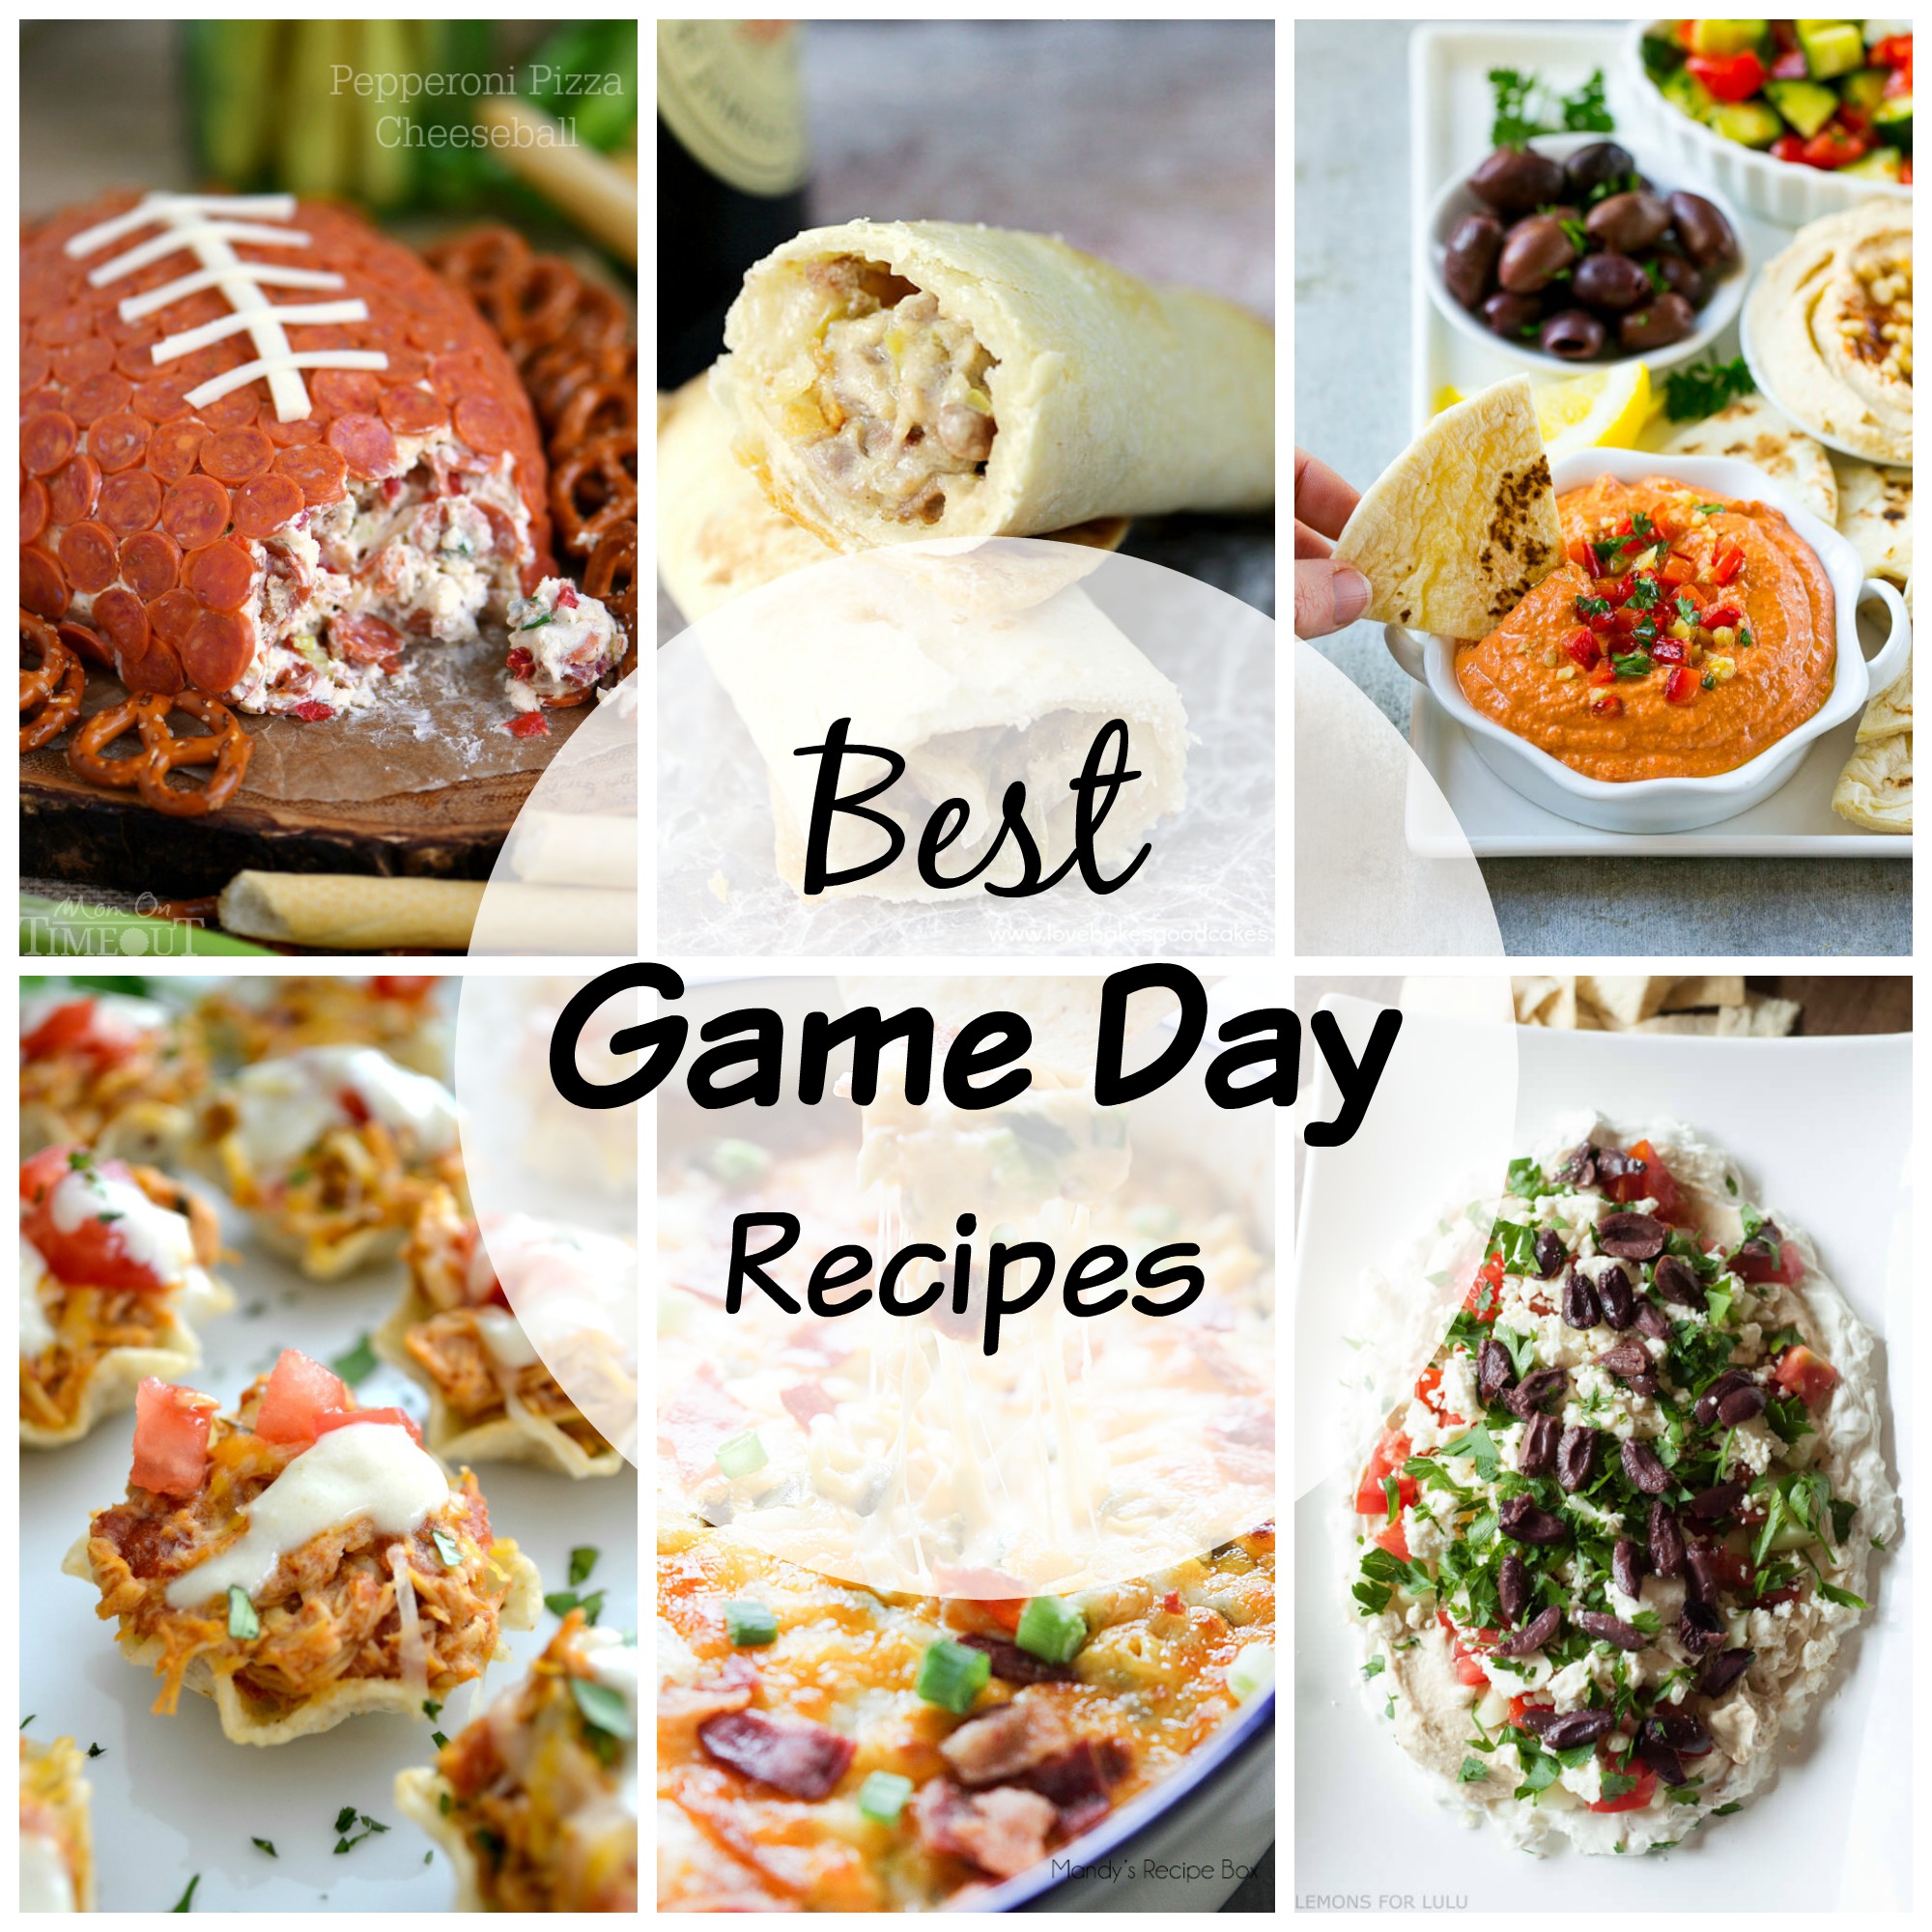 The BEST Game Day Recipes